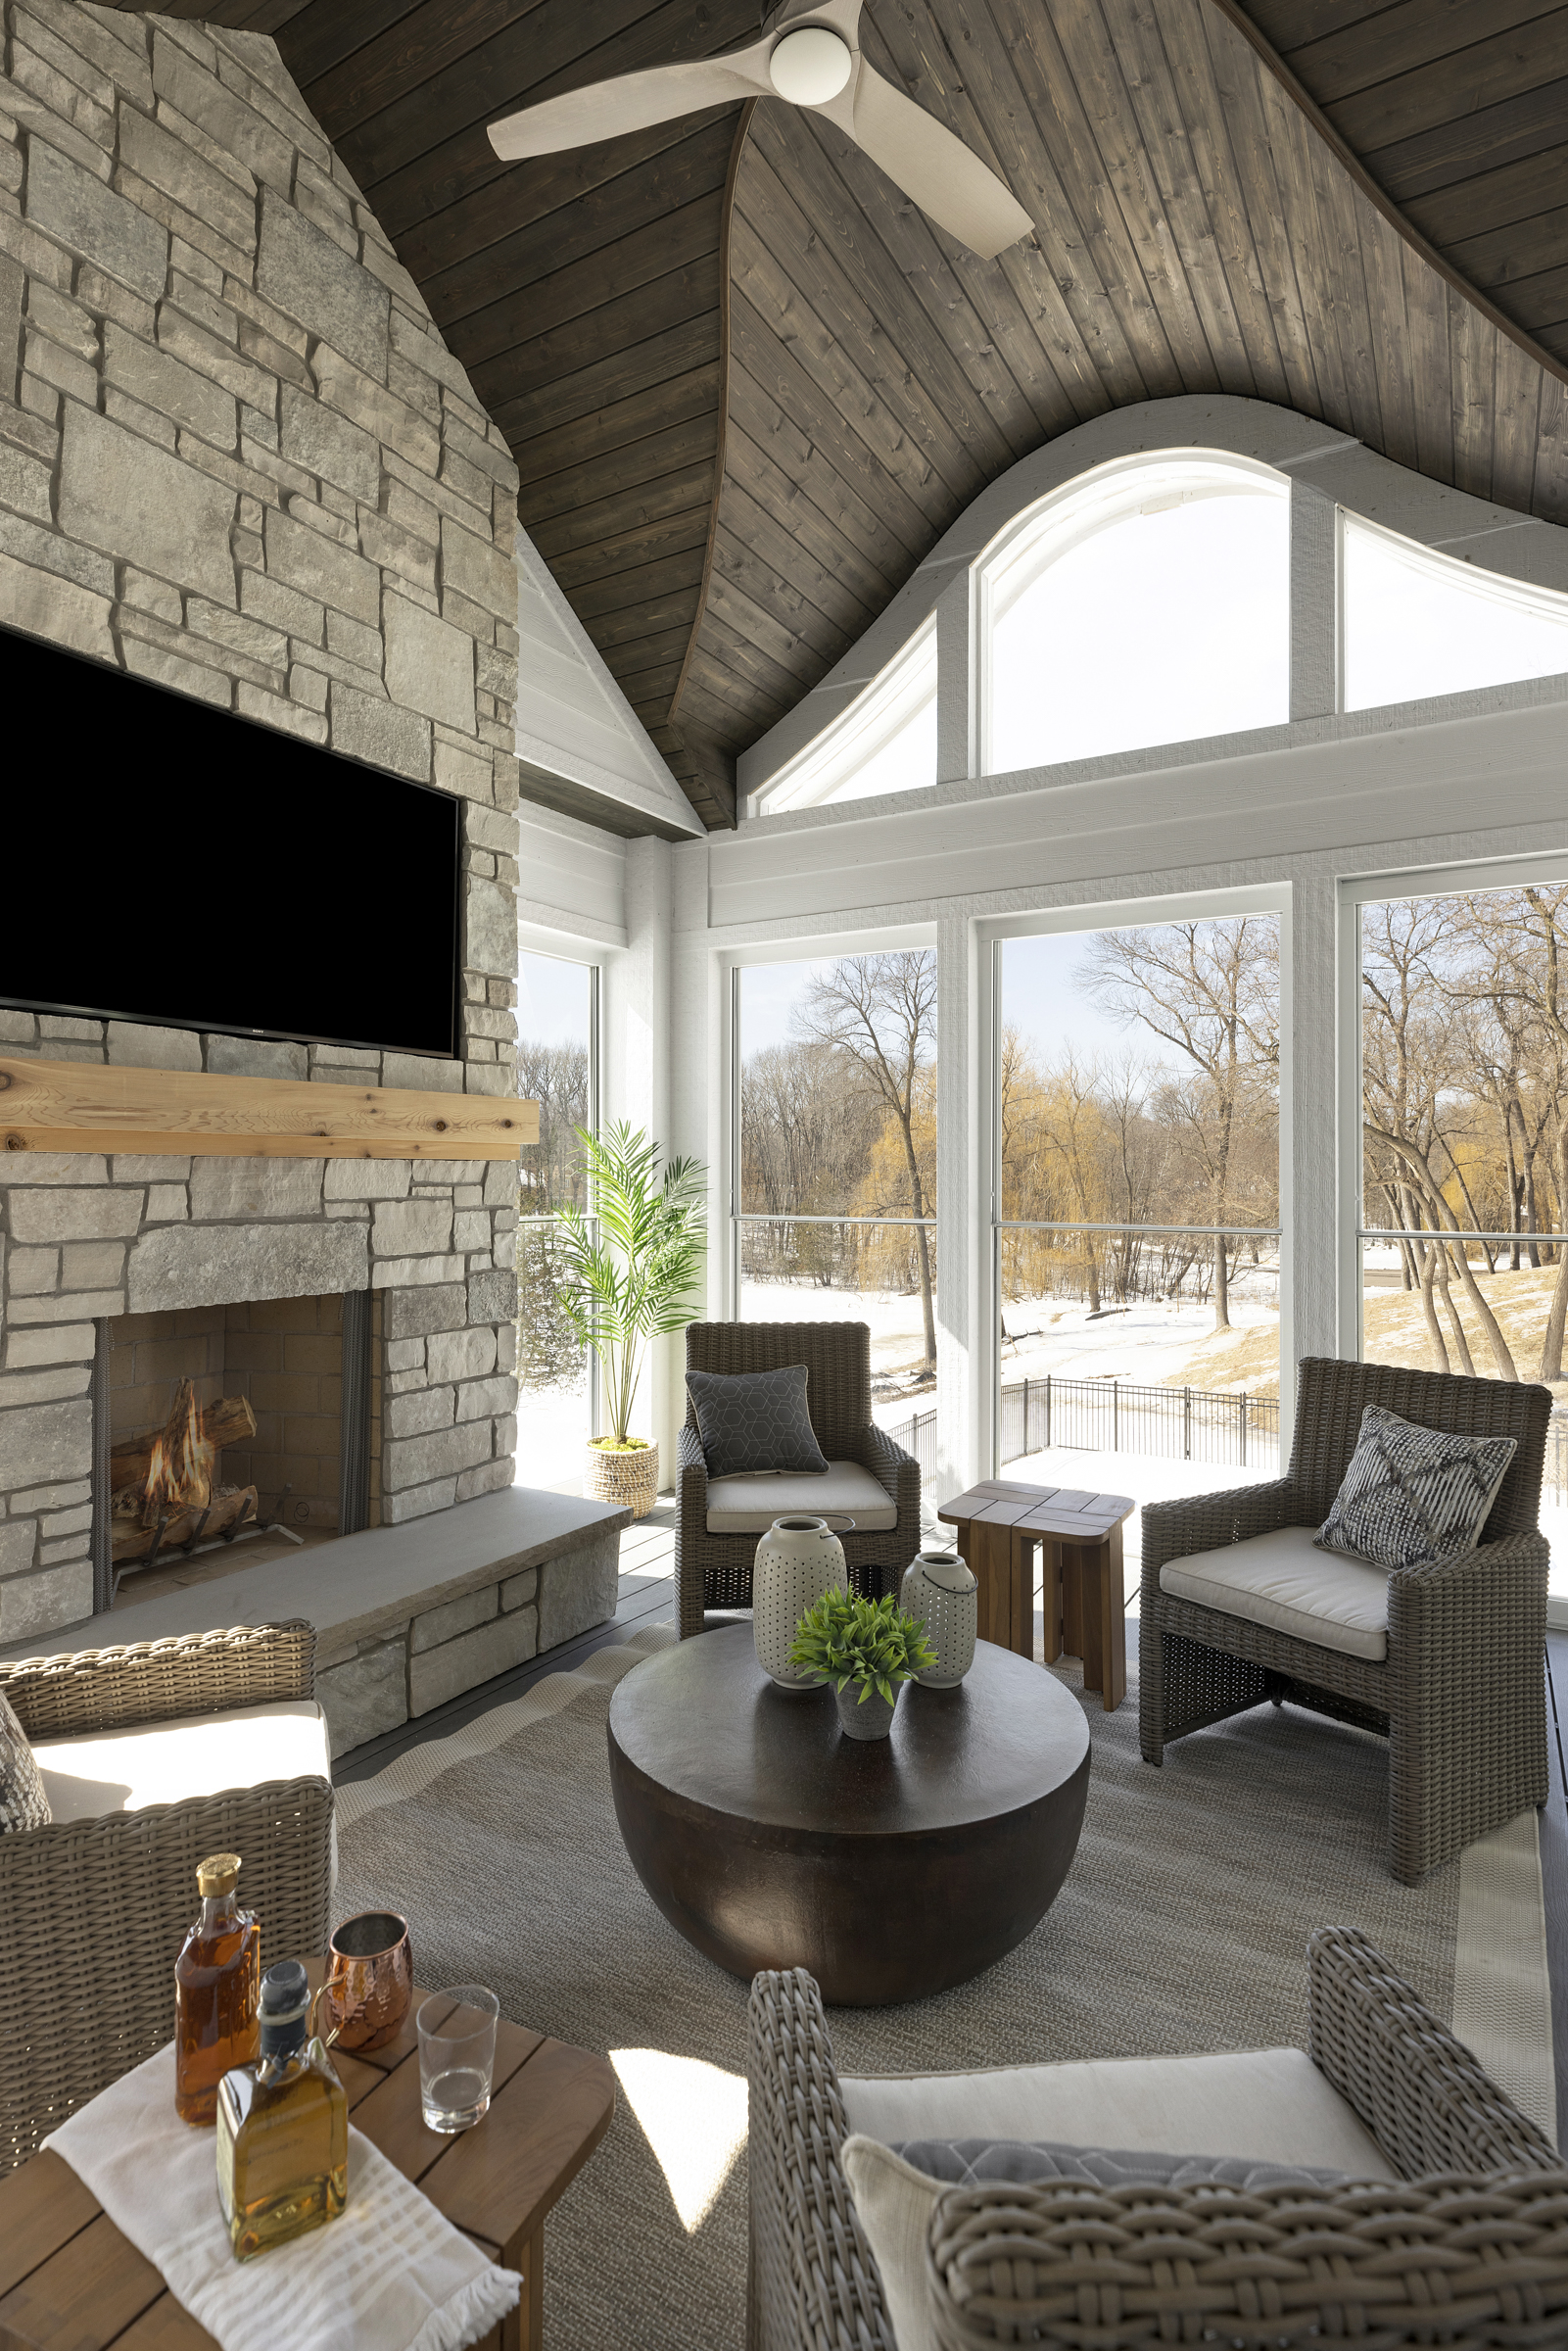 A living room with a stone fireplace and a flat screen tv.